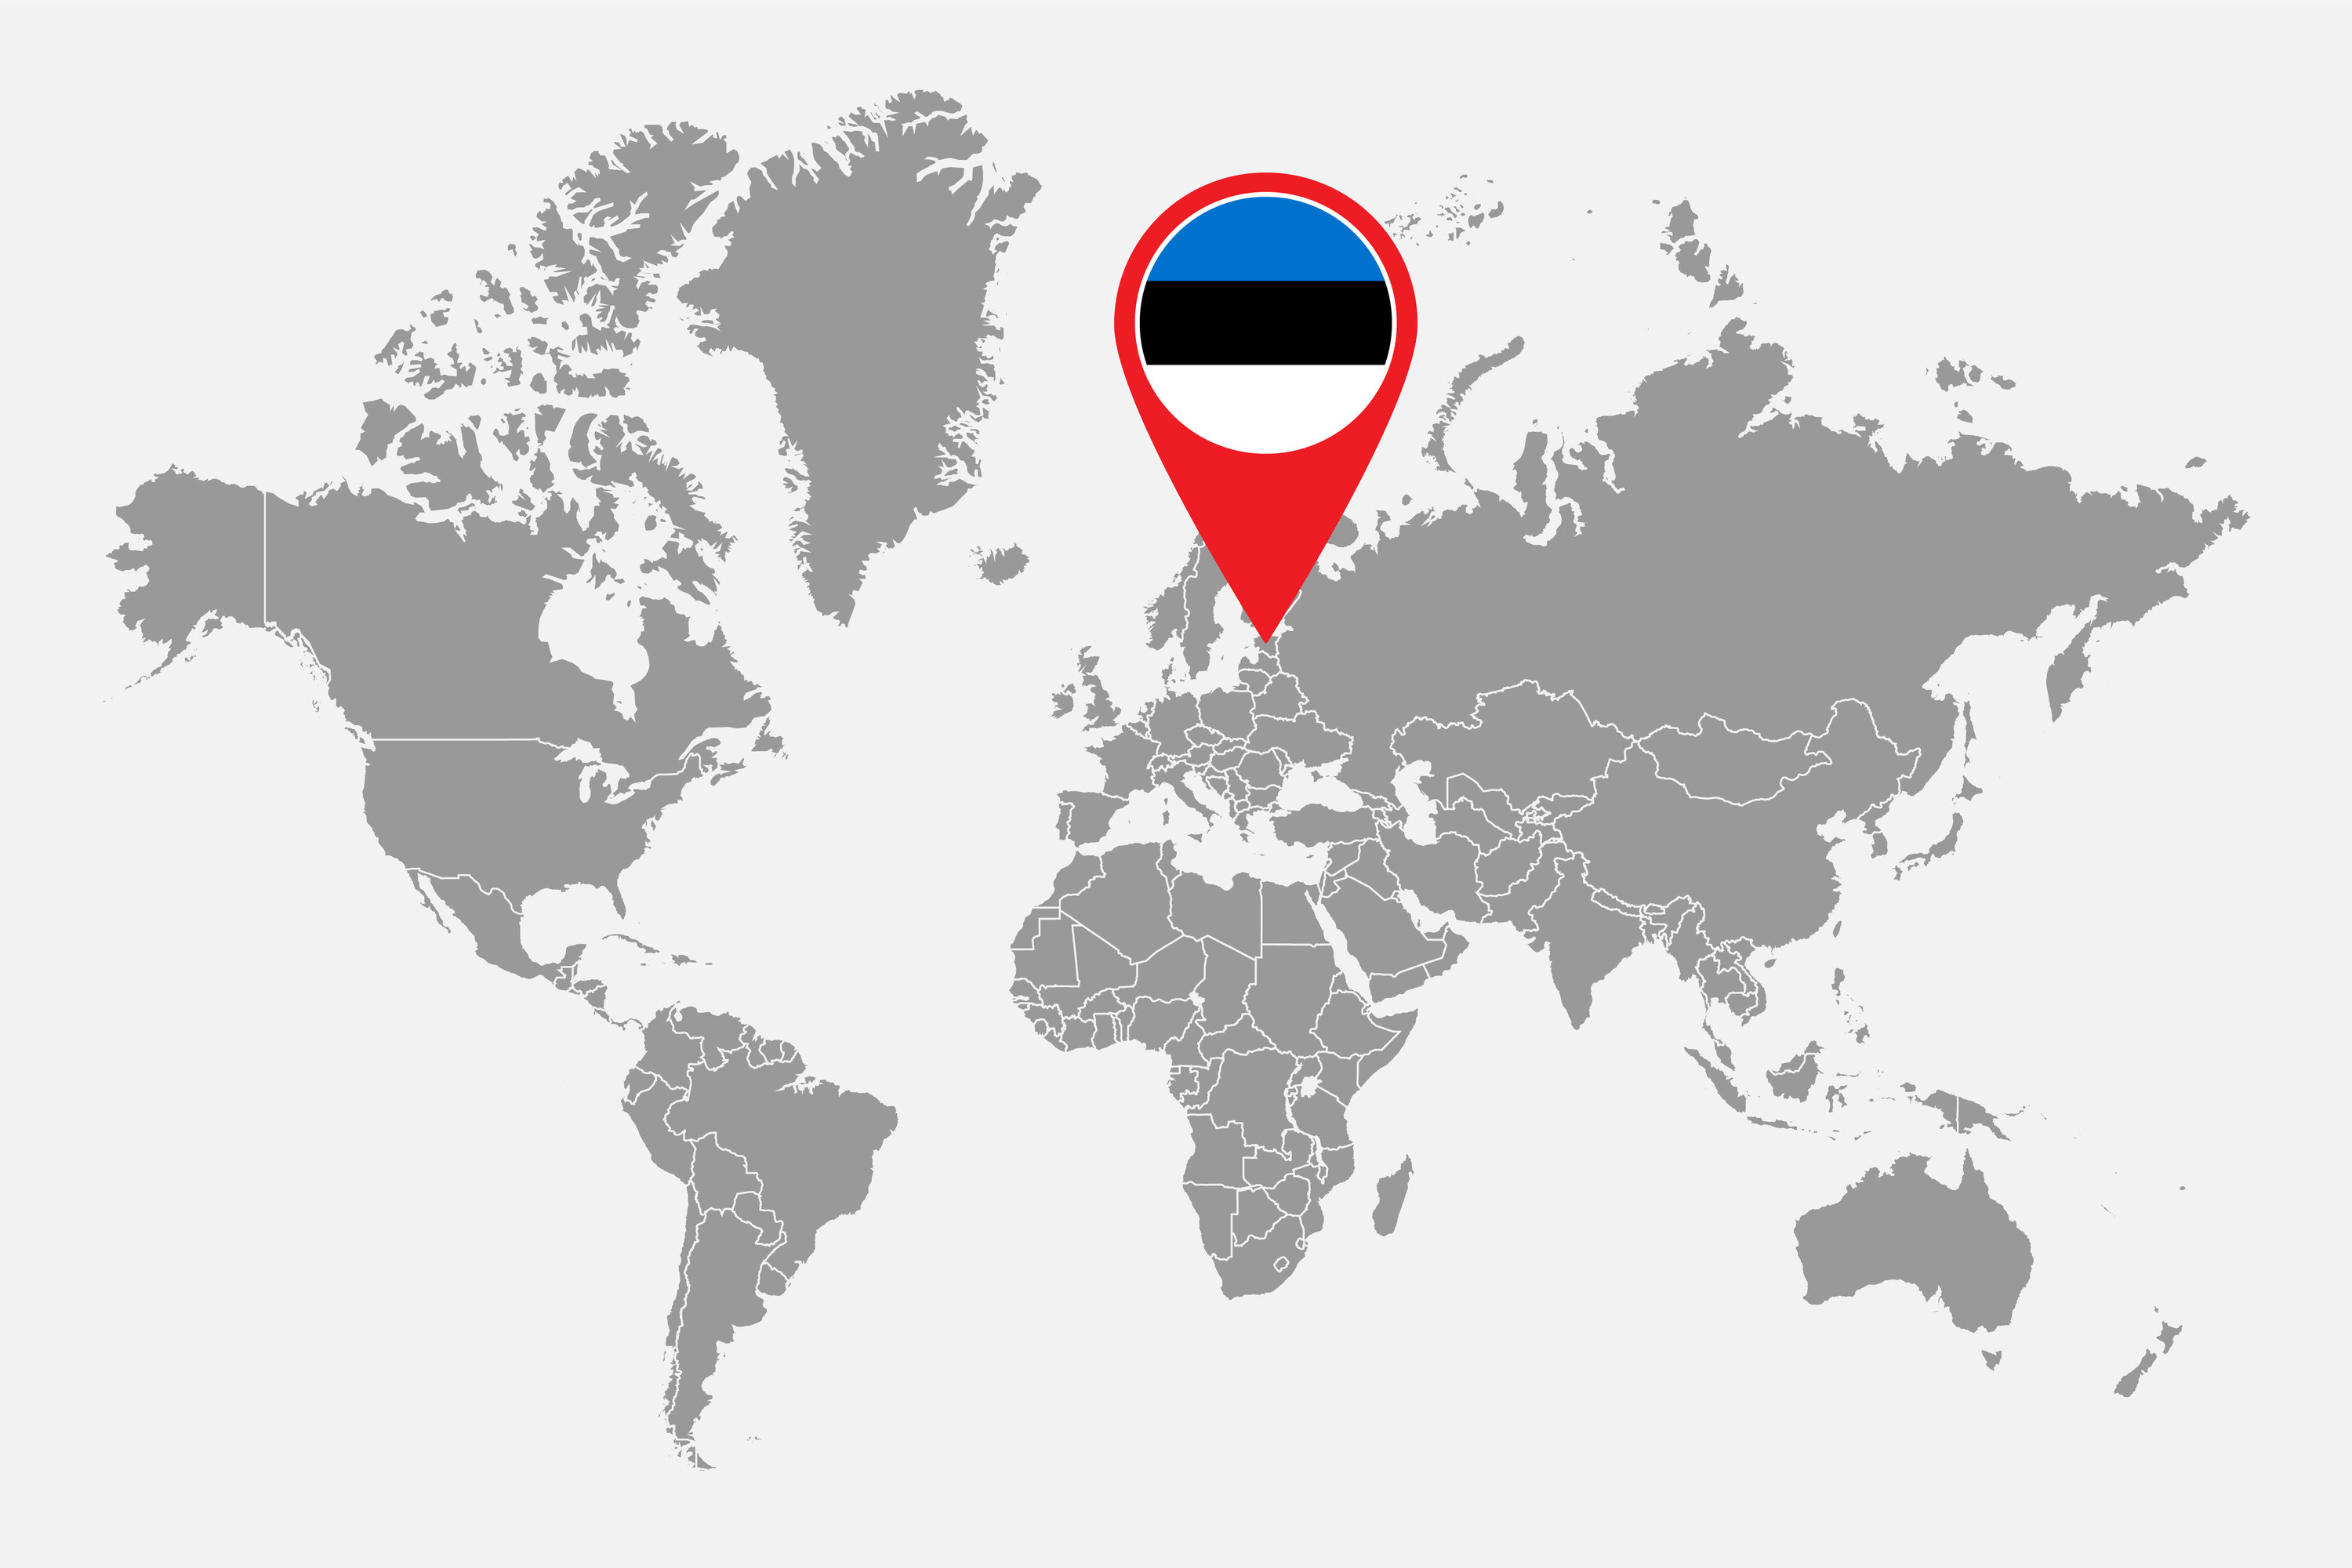 A world map with Estonia indicated